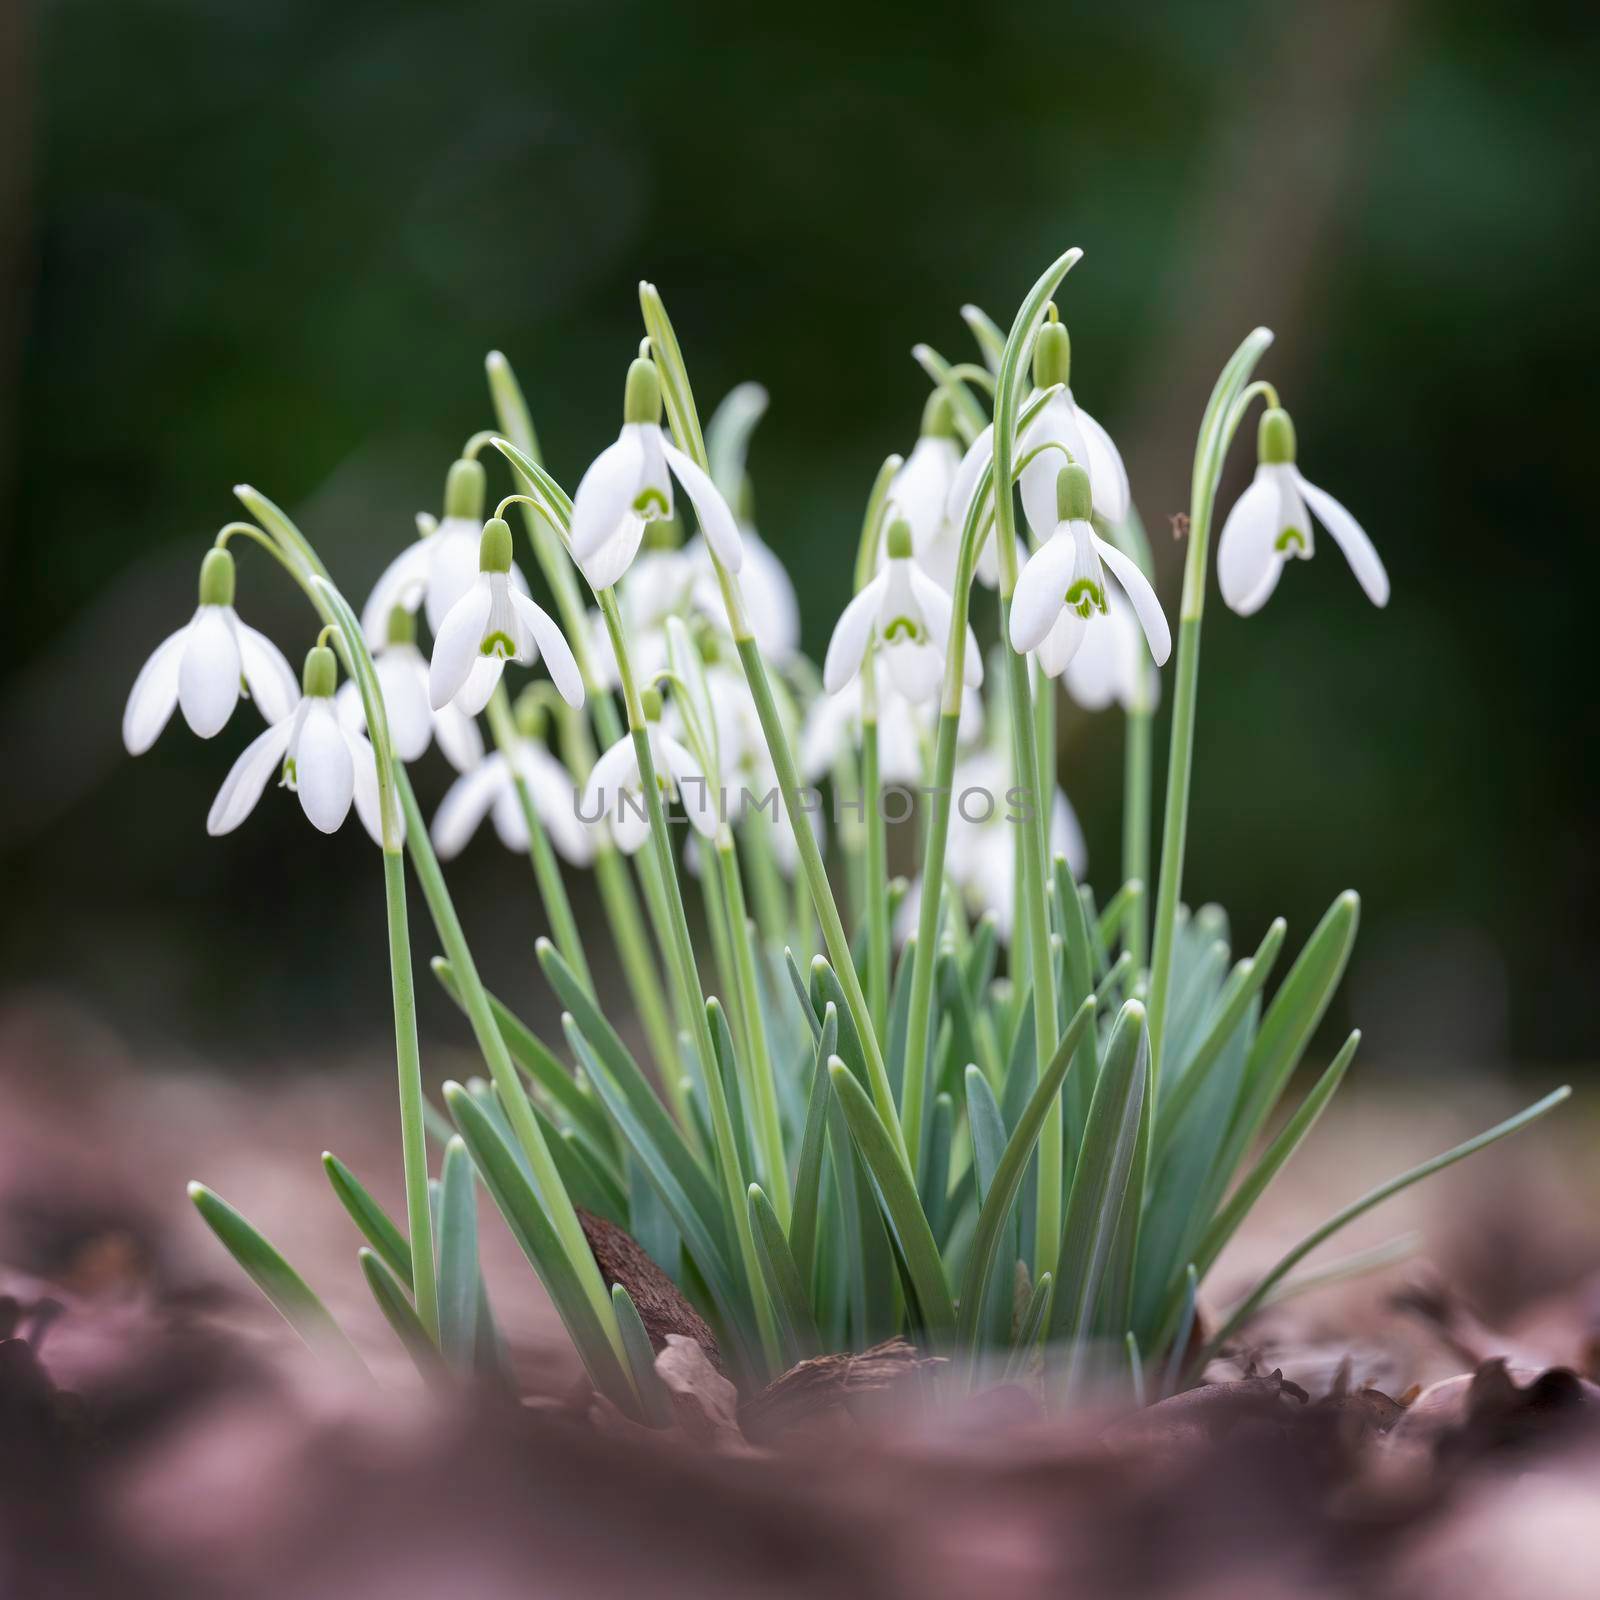 group of snowdrops against out of focus background by ahavelaar